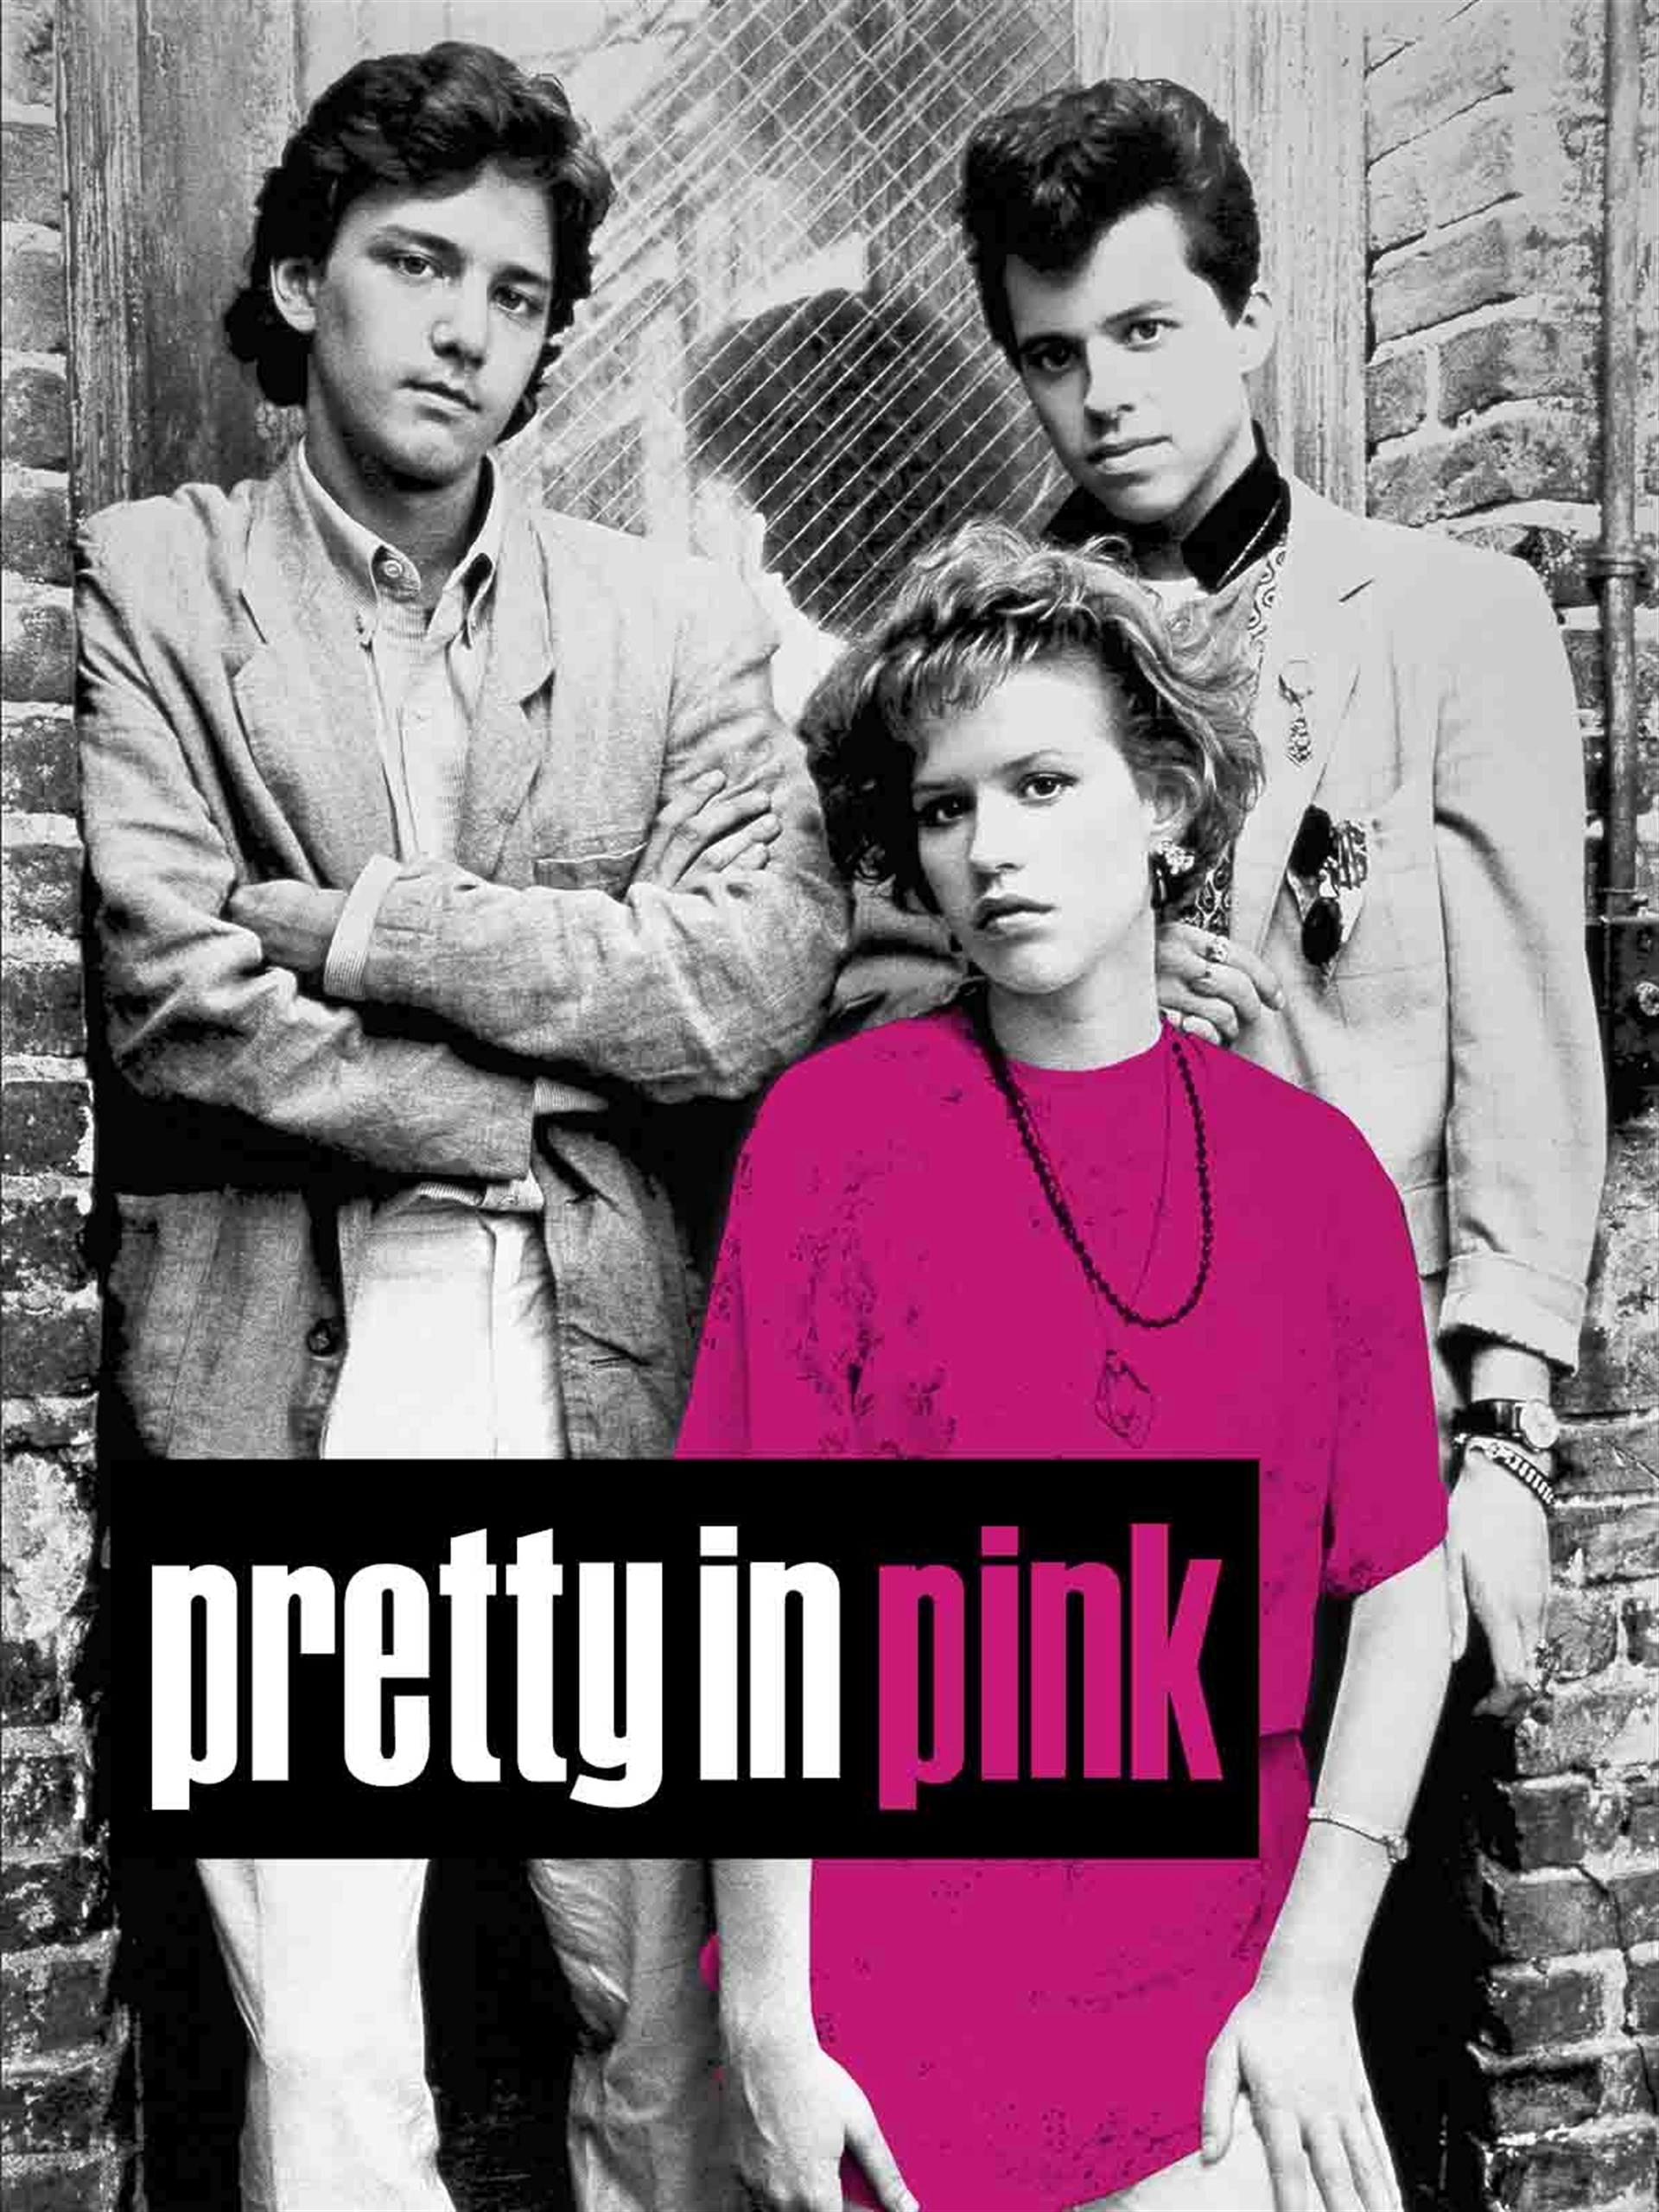 aaron culver recommends pretty in pink torrent pic